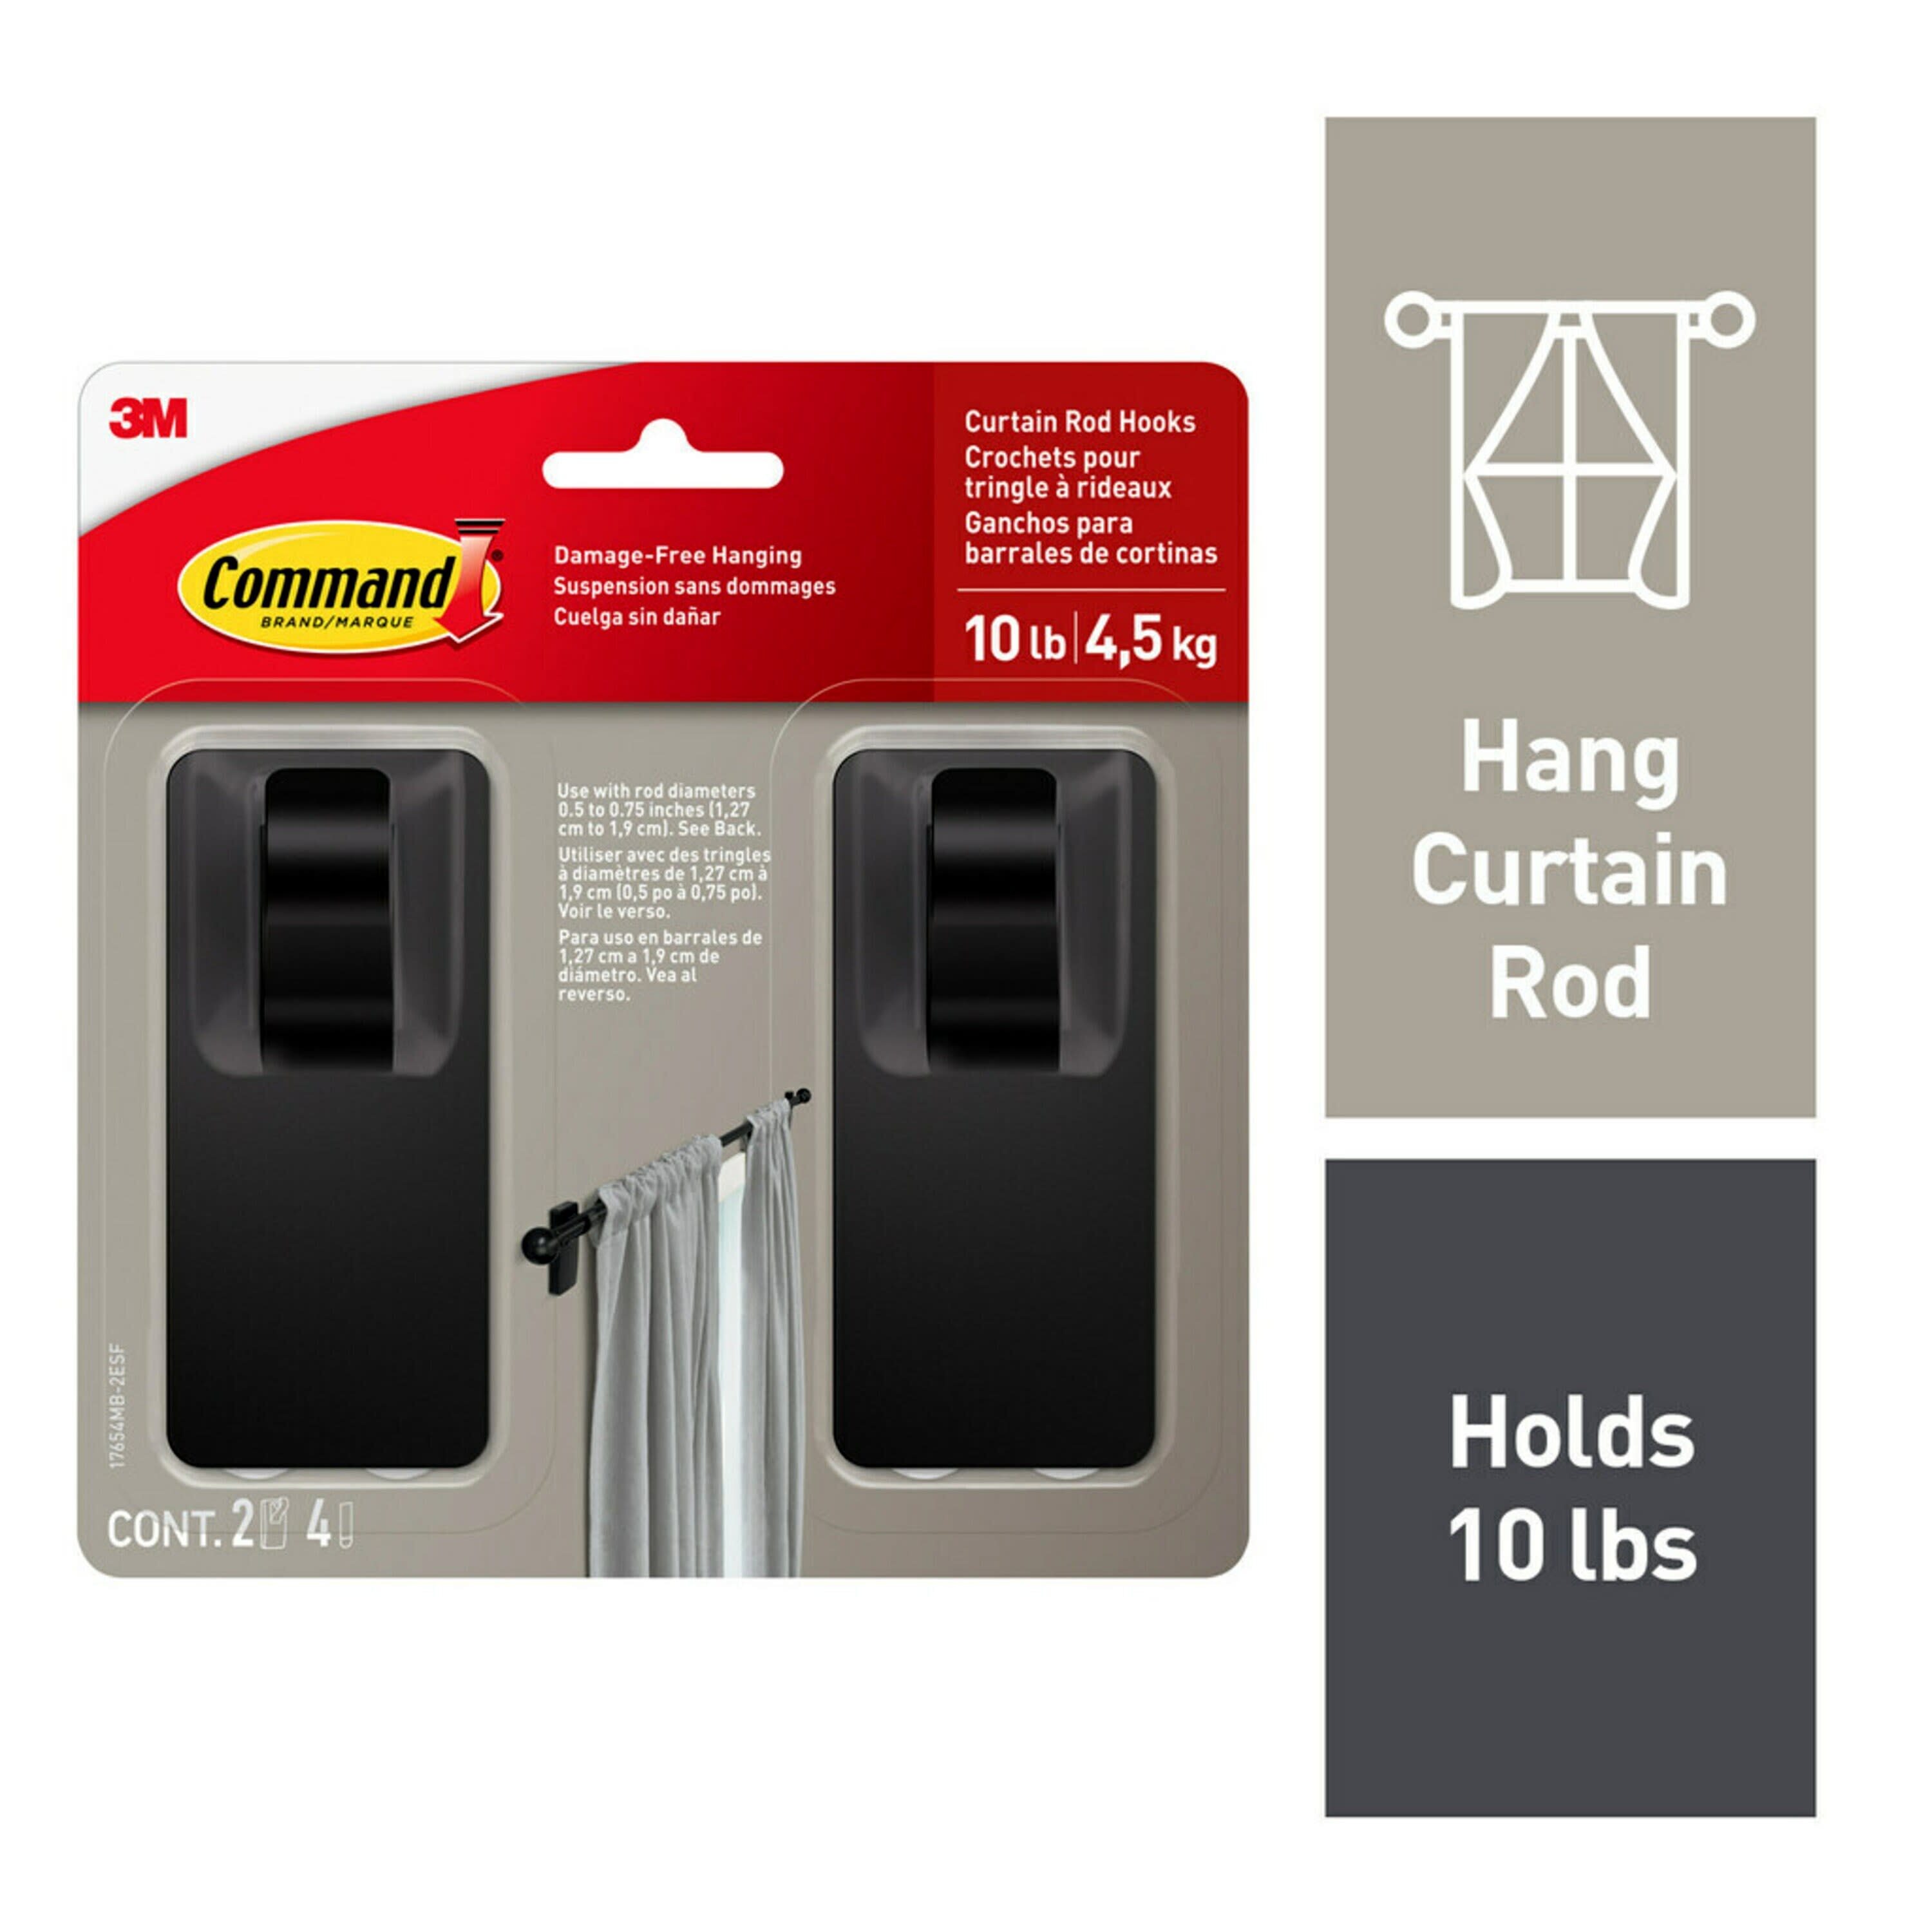  Command Matte Black Curtain Rod Hooks with Command Strips, Hang Curtain  Rods No Drilling, Holds up to 10 lbs : Home & Kitchen